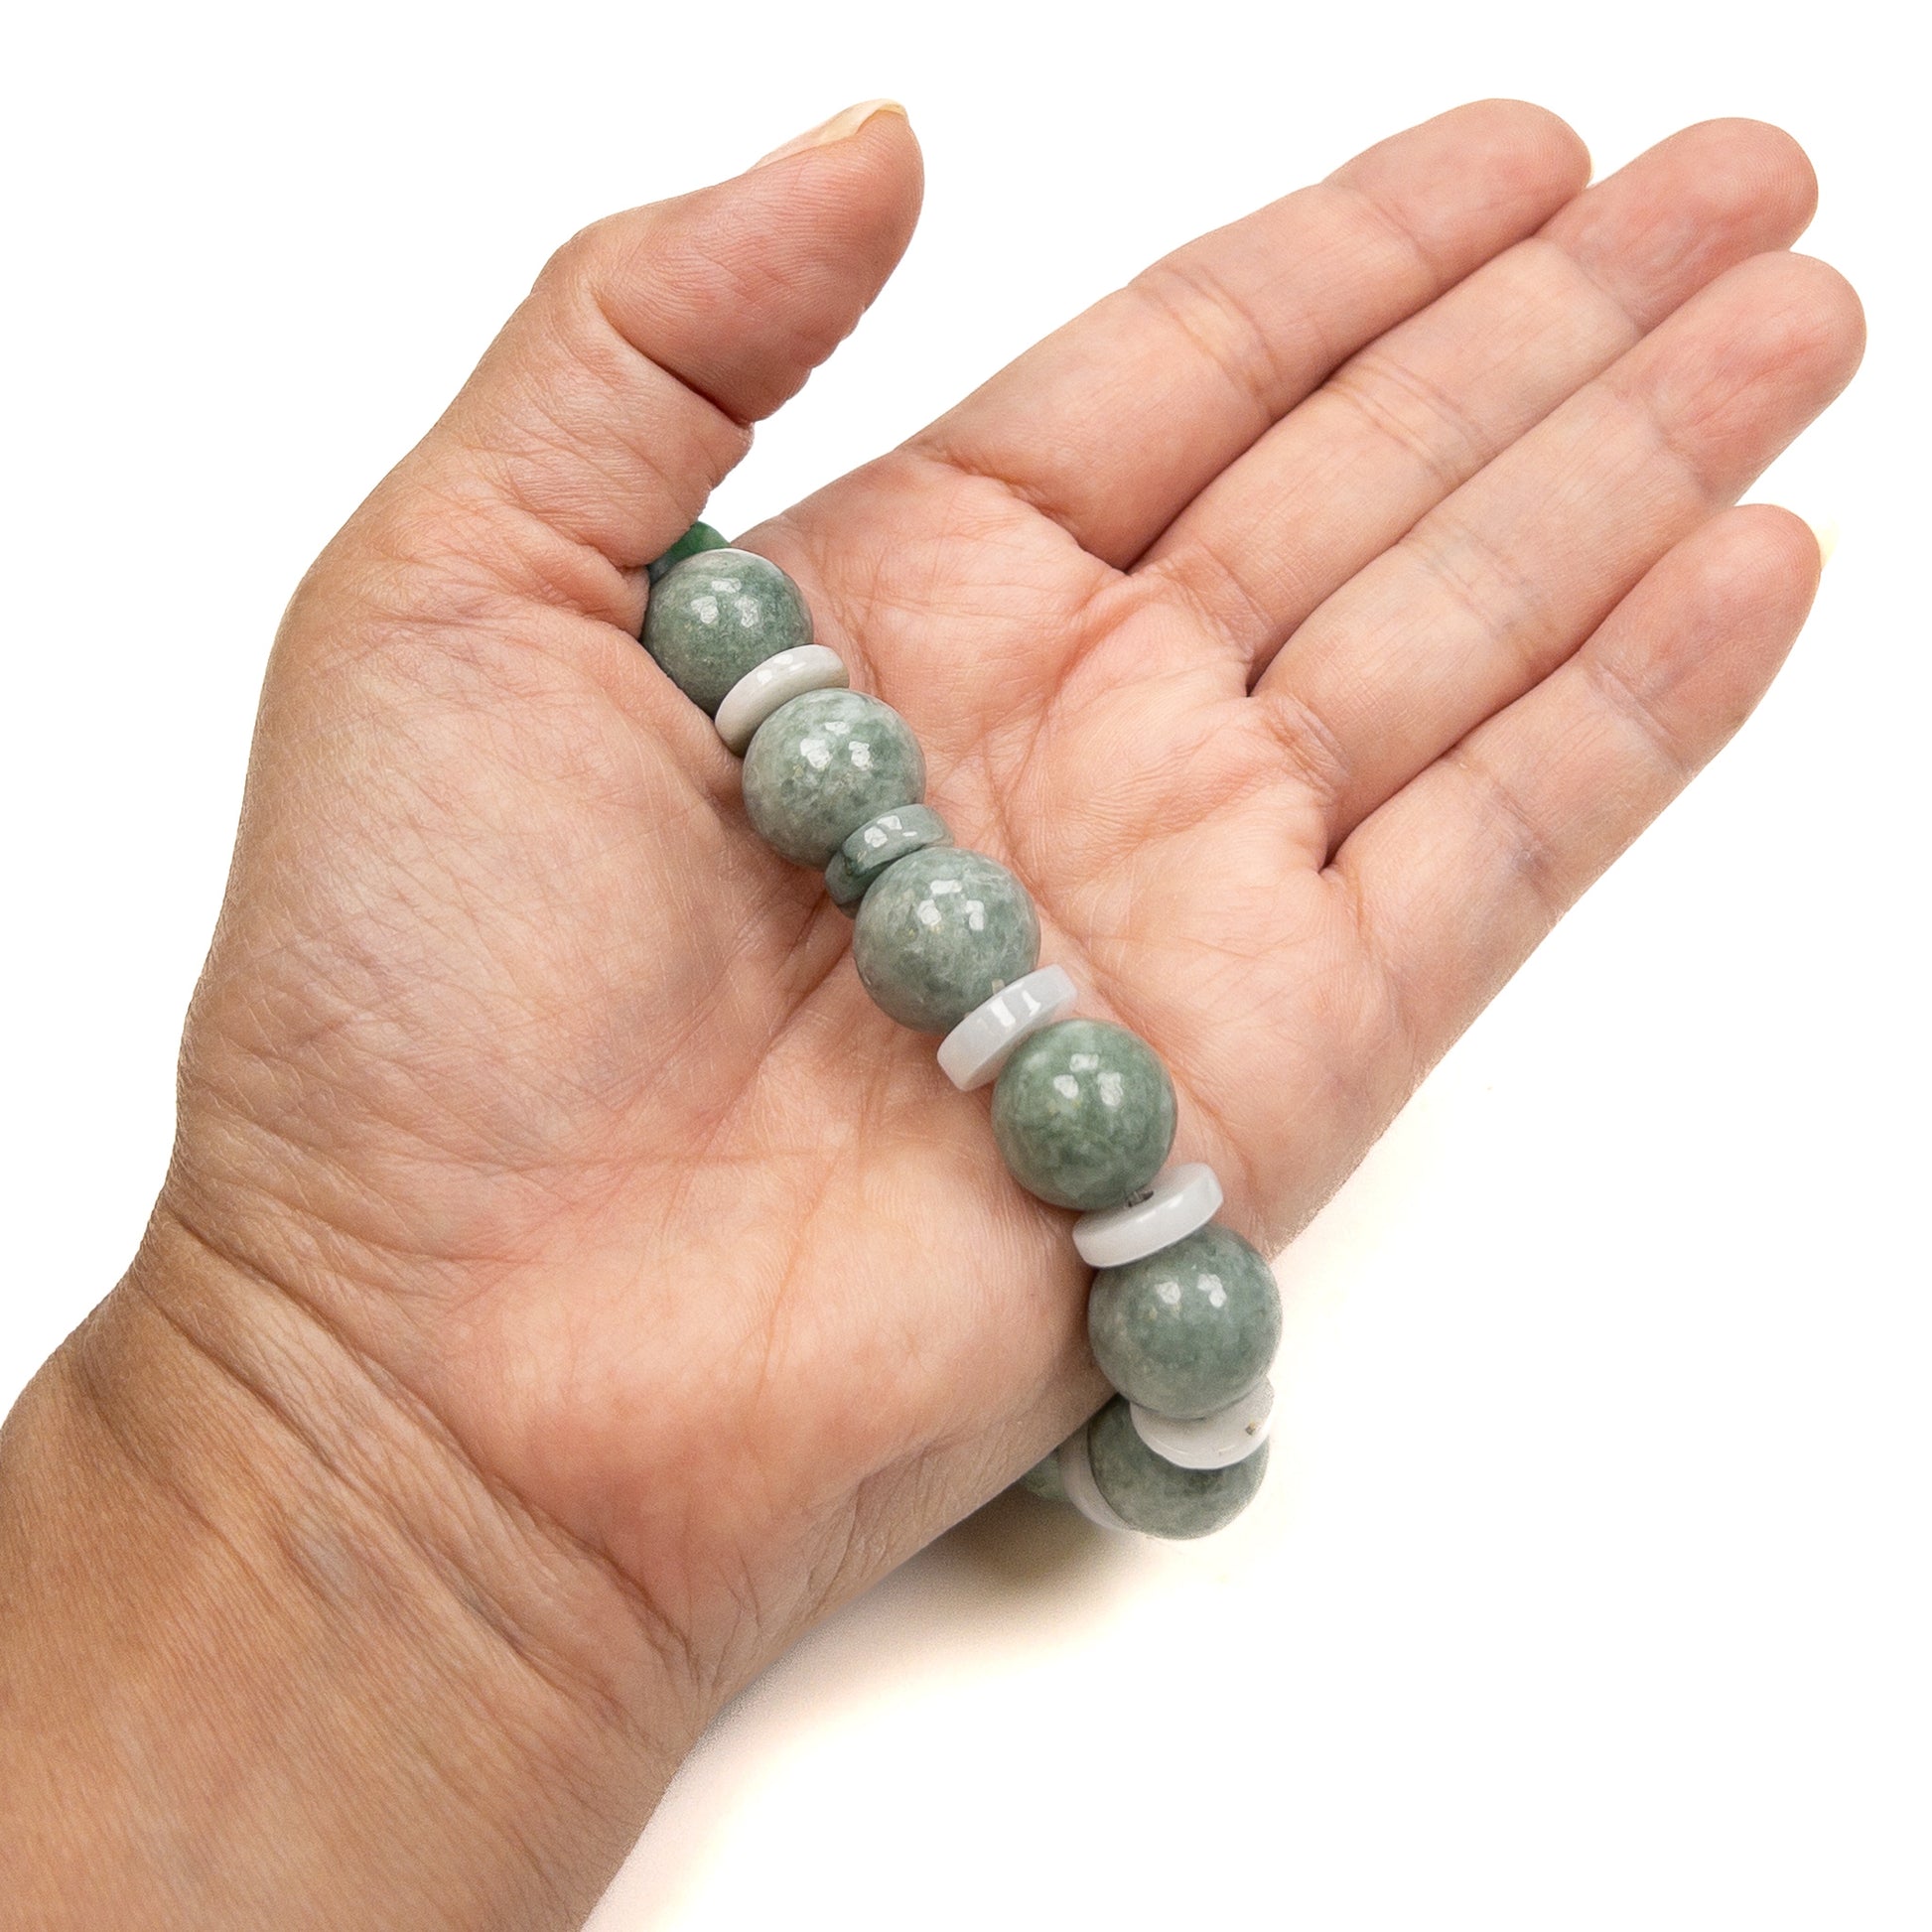 Green Jade 13-14mm Rustic Round & Washer Bead Stretchy Bracelet